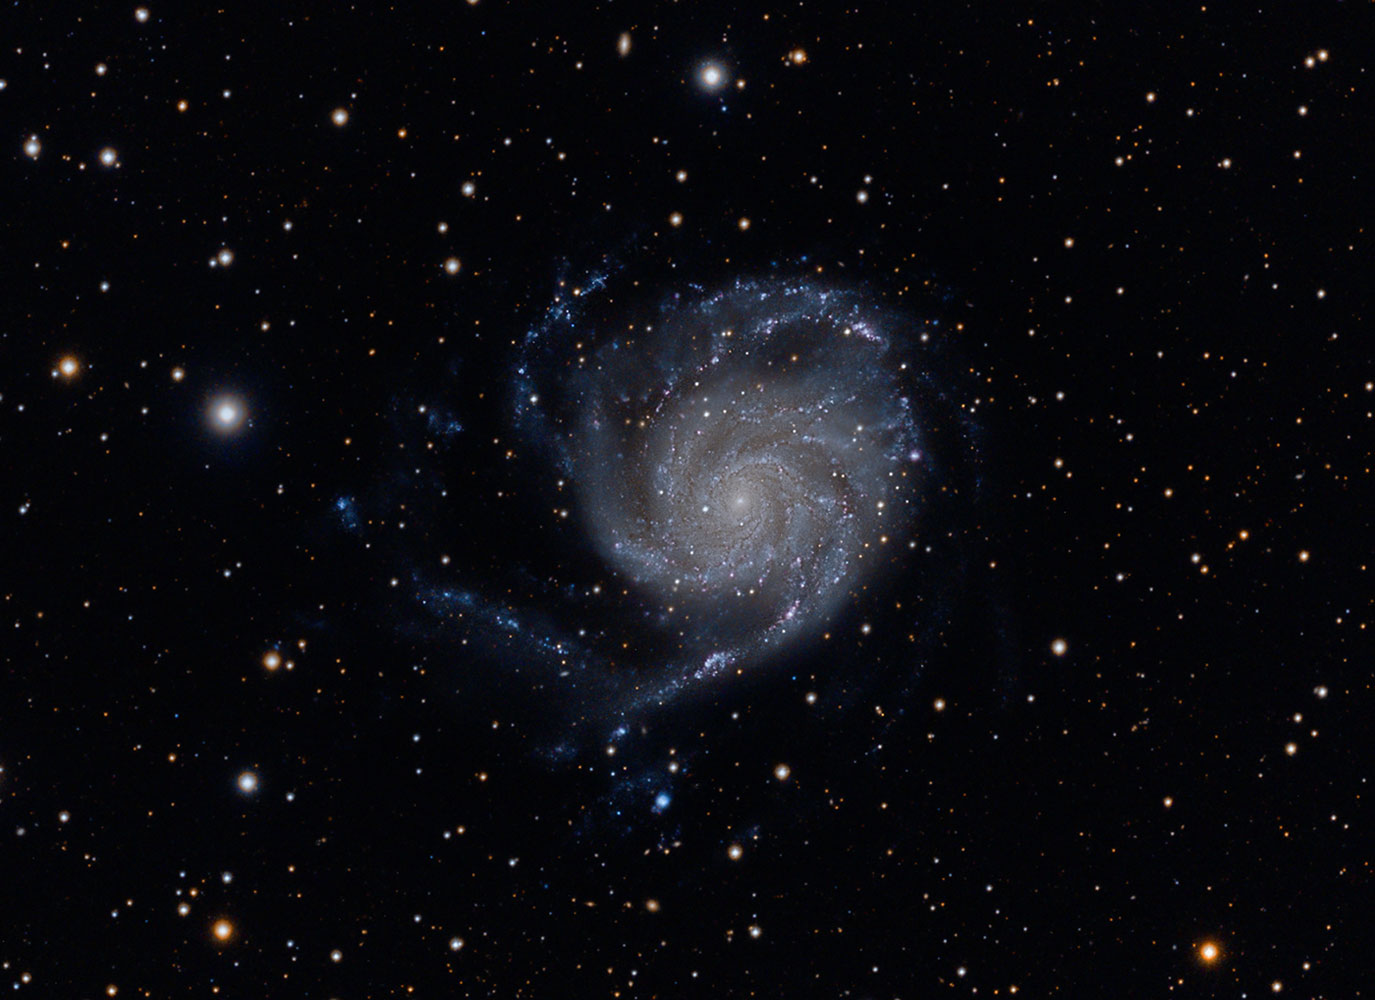 The Pinwheel Galaxy, also known as Messier 101, M101 or NGC 5457, taken at the Winter Star Party in the Florida Keys on March 1, 2014.